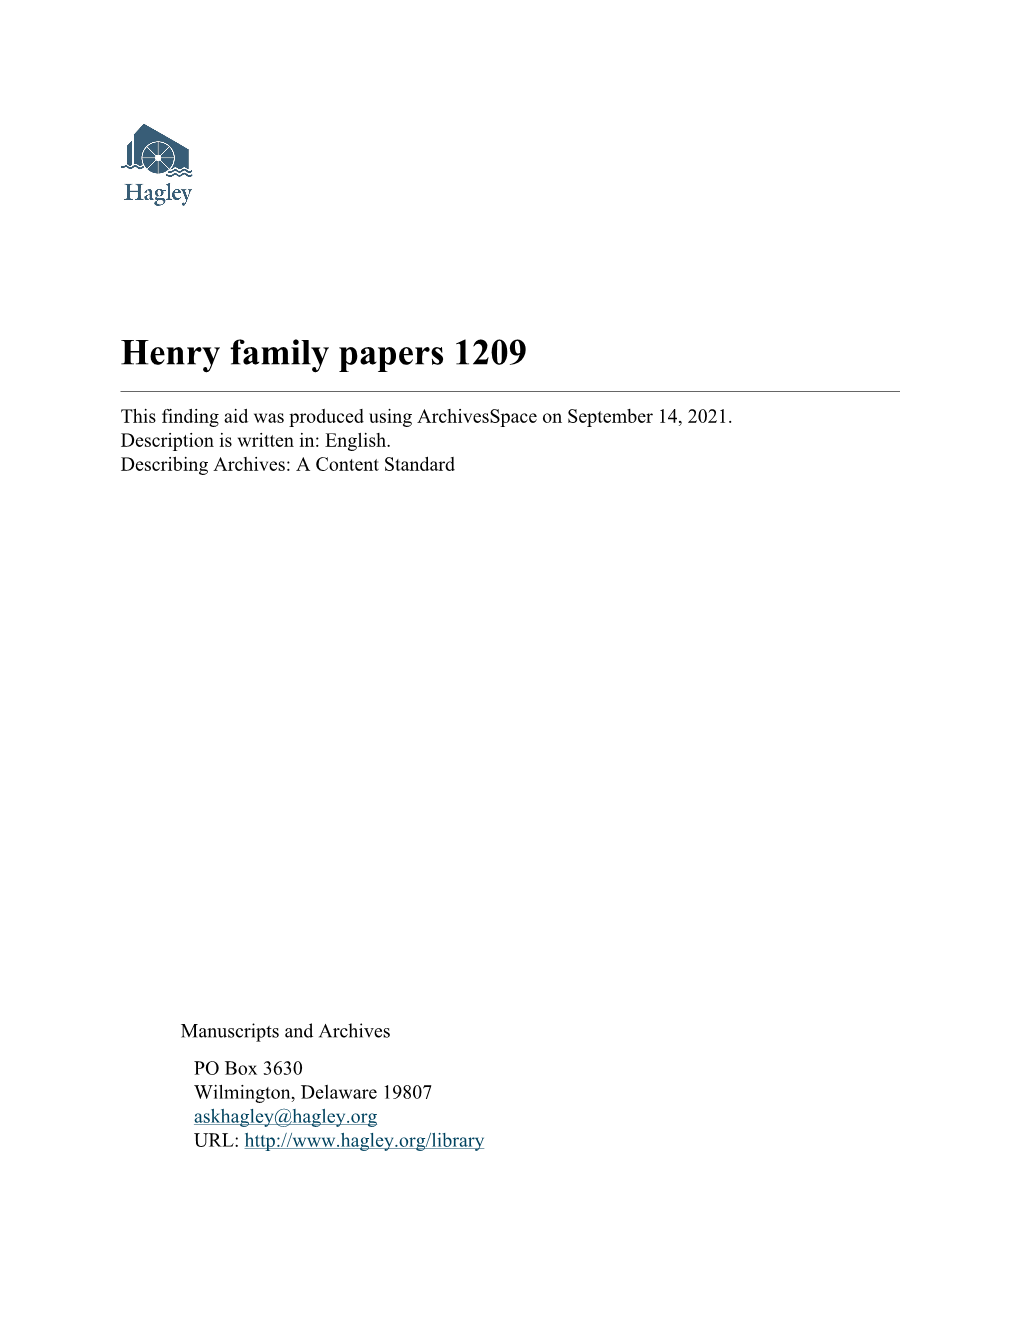 Henry Family Papers 1209